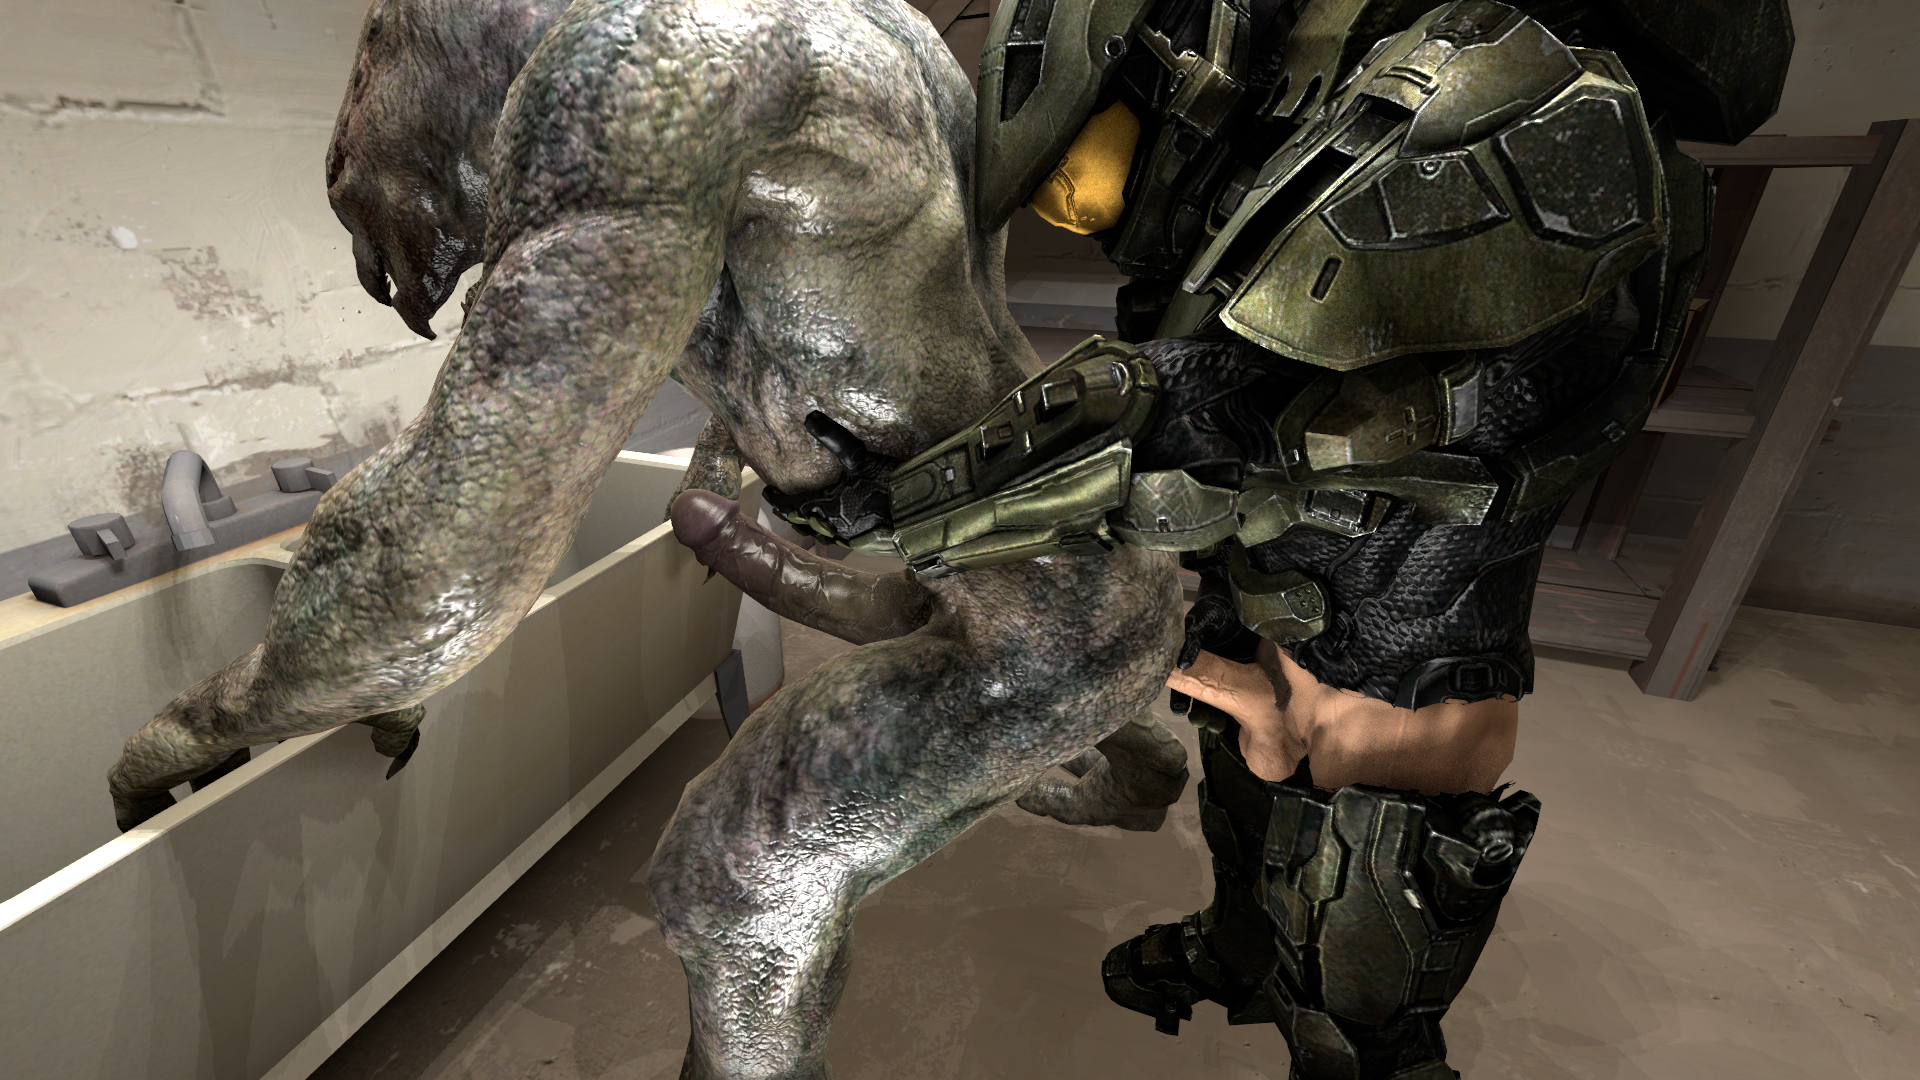 Meets giant master chief